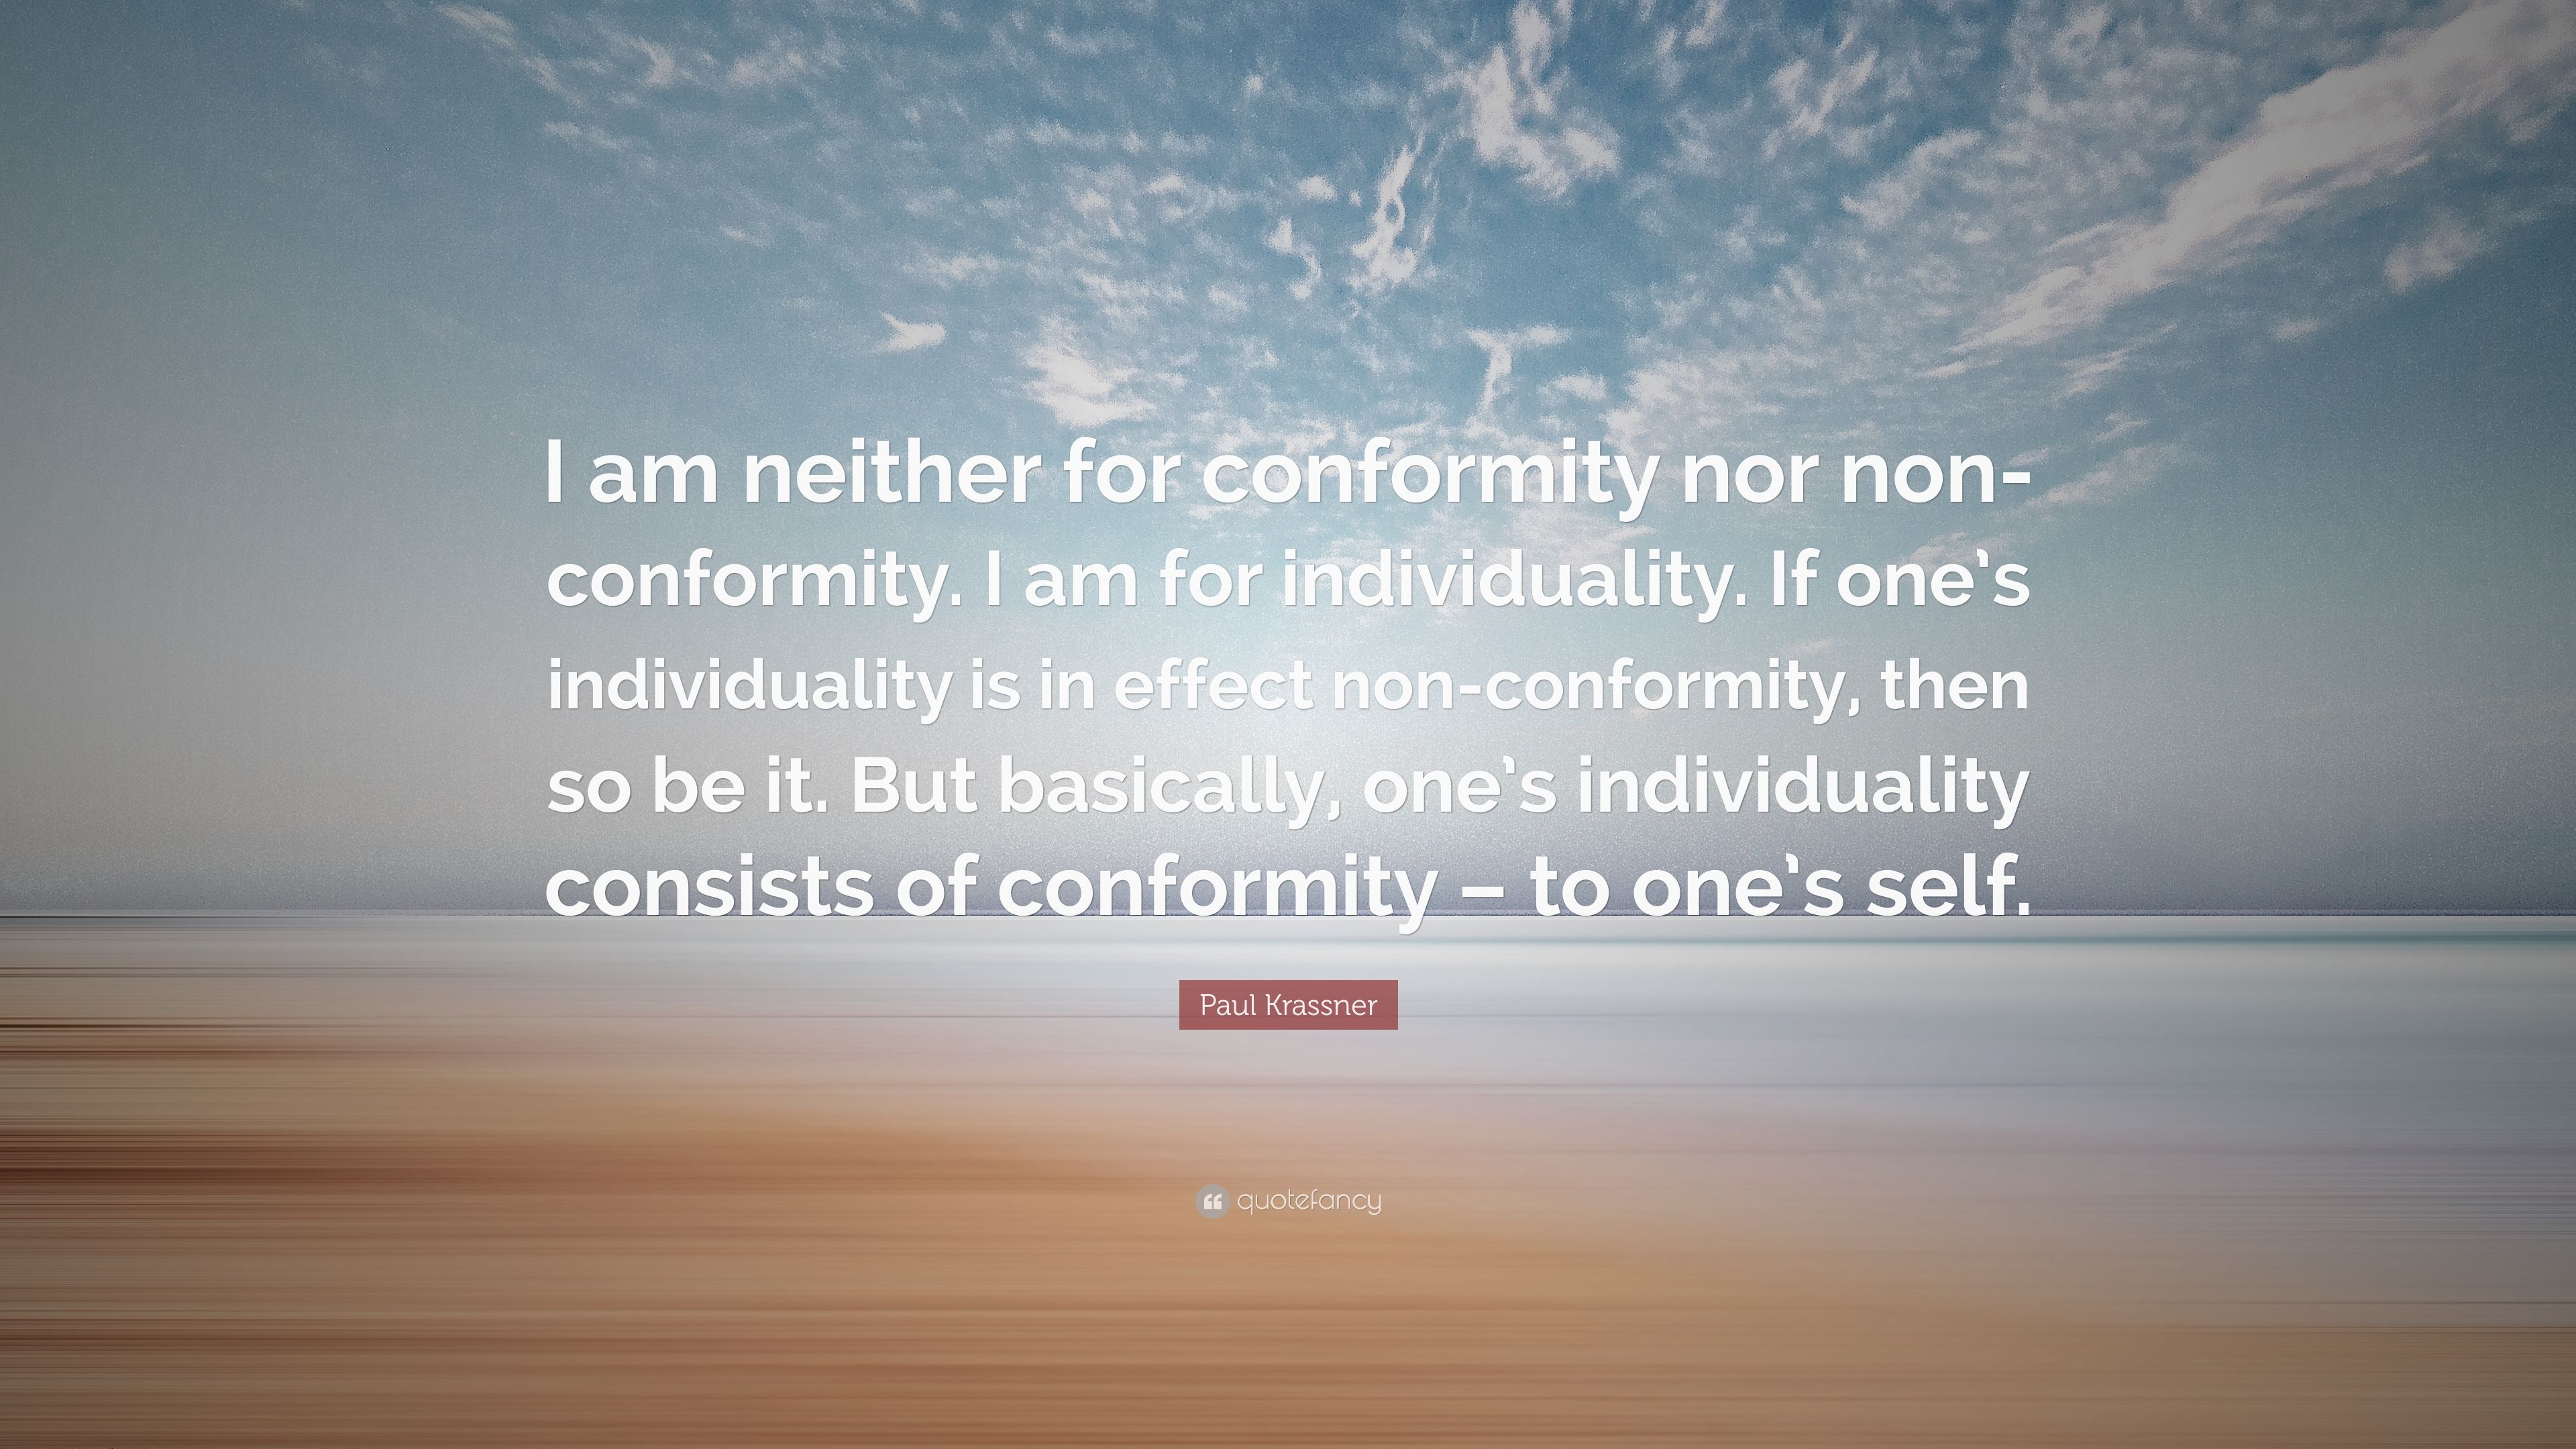 Paul krassner quote âi am neither for conformity nor non